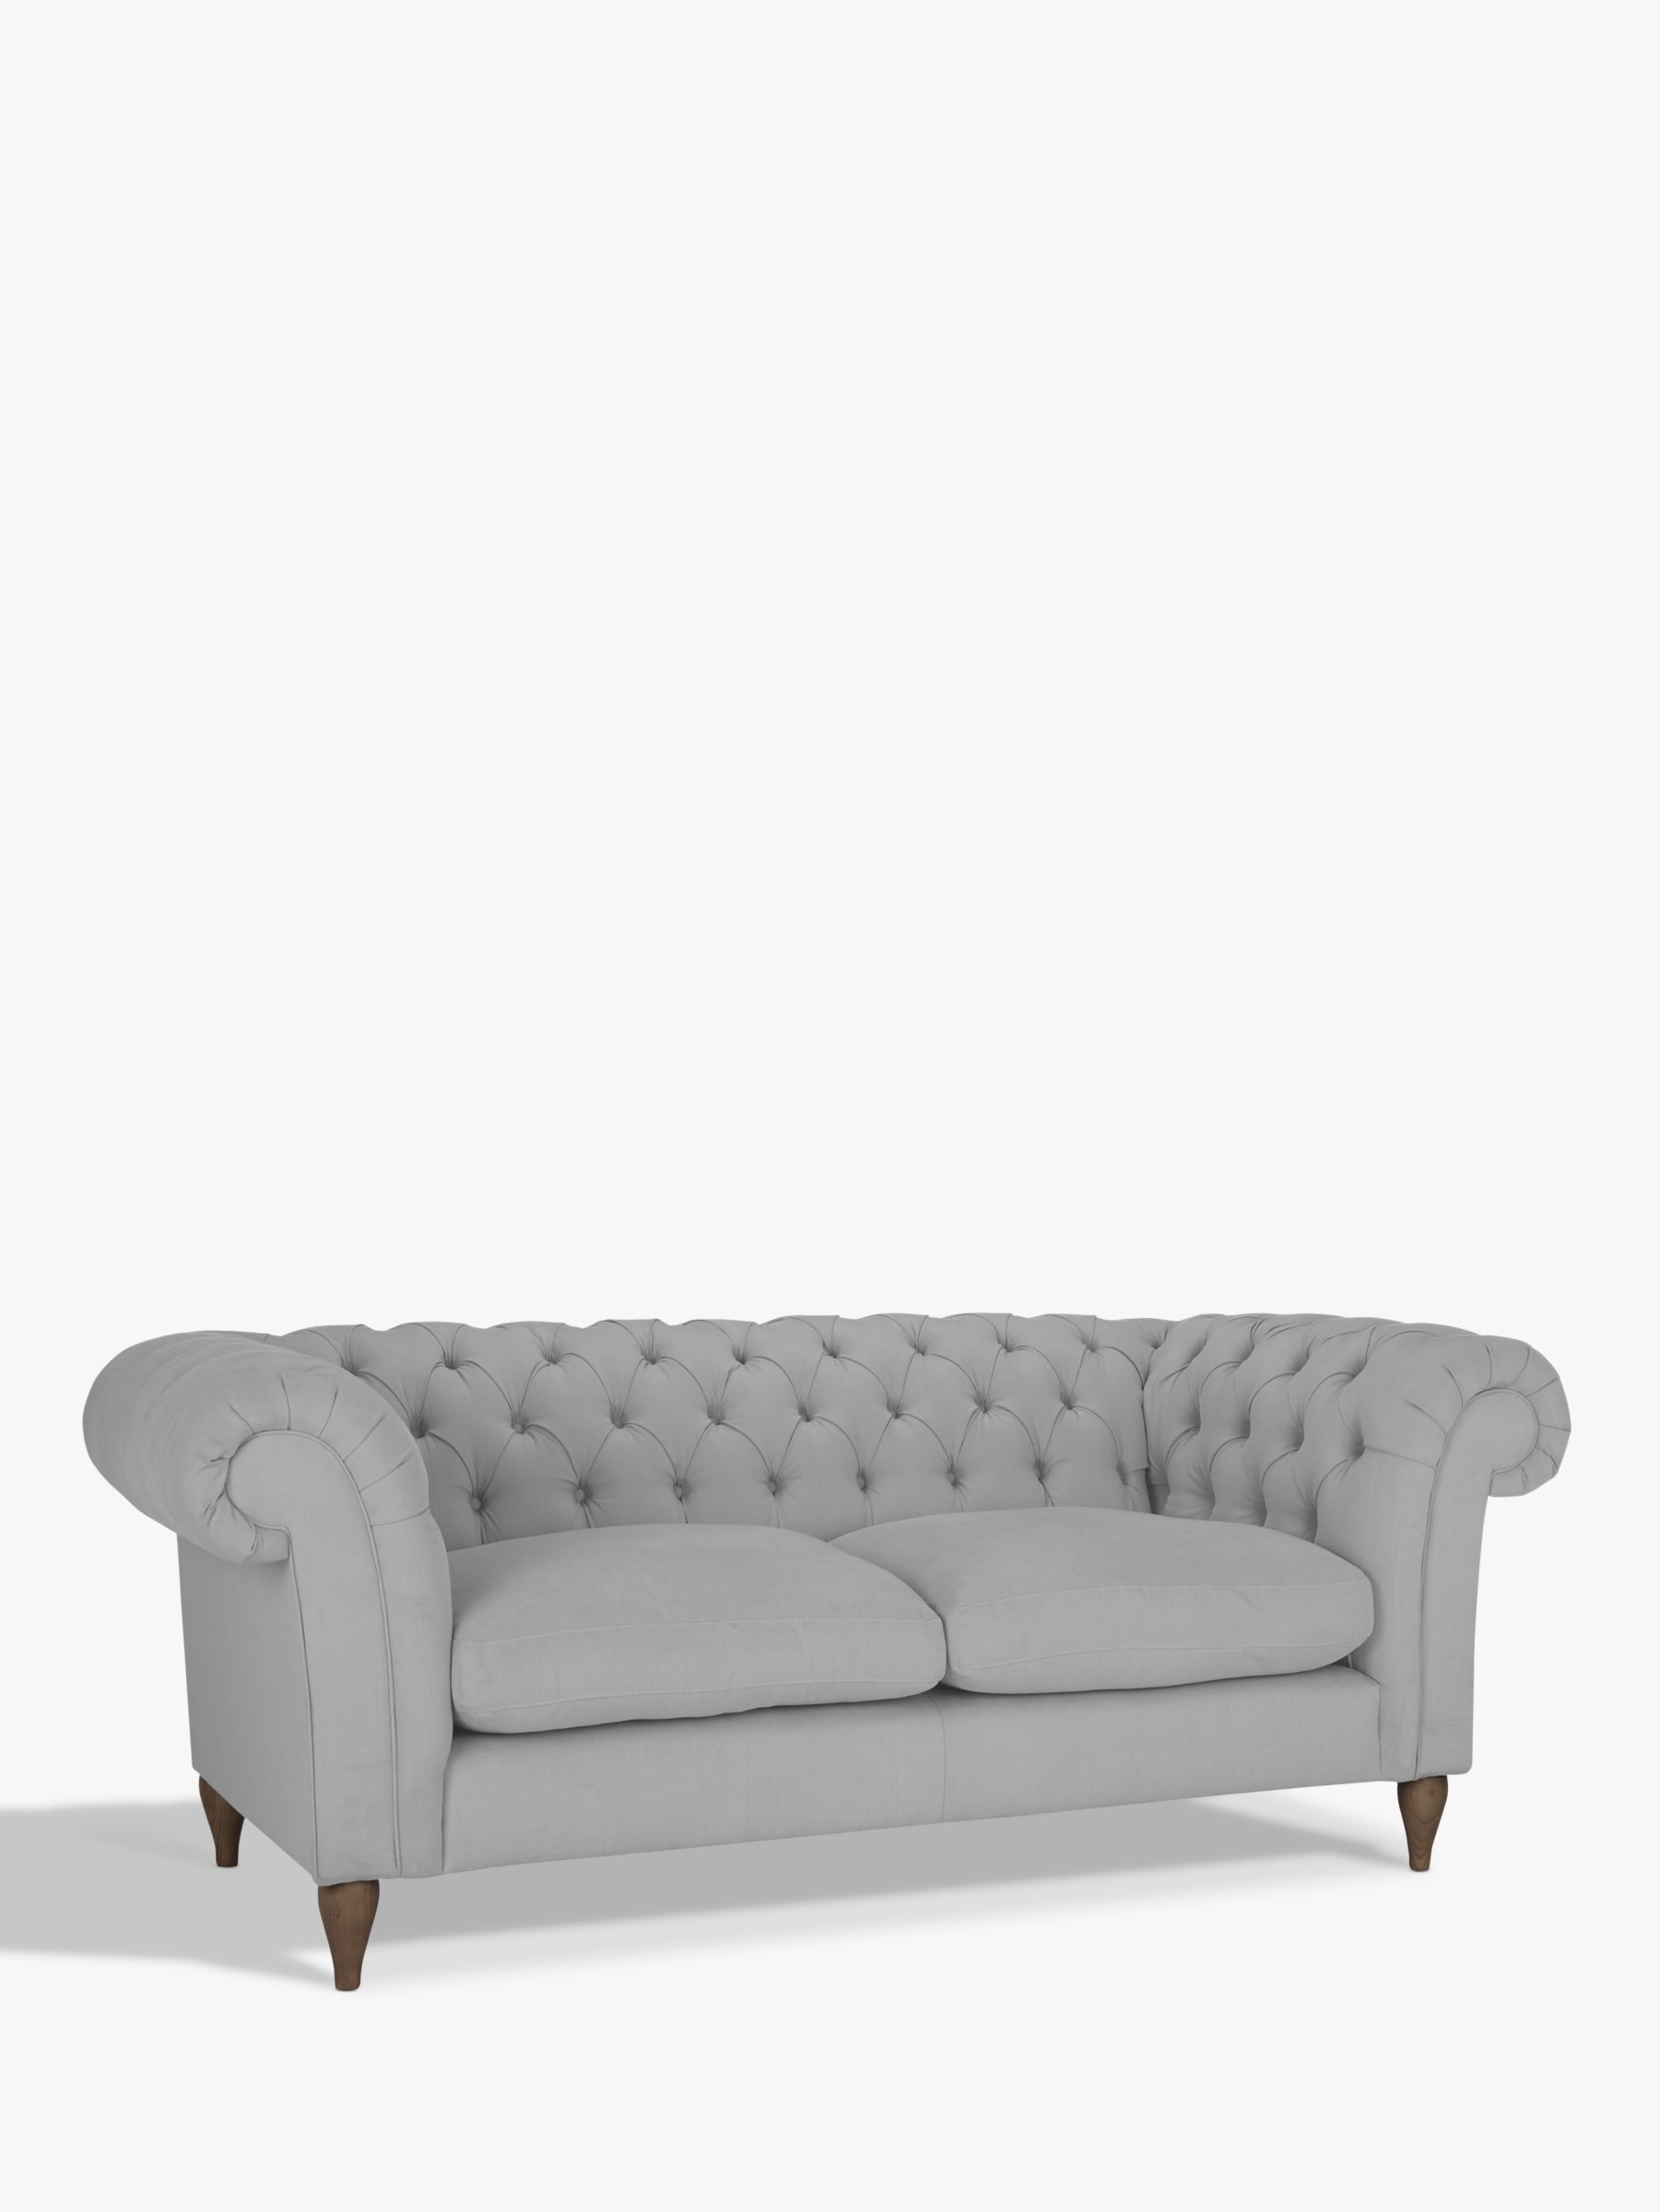 Photo of John lewis cromwell chesterfield large 3 seater sofa